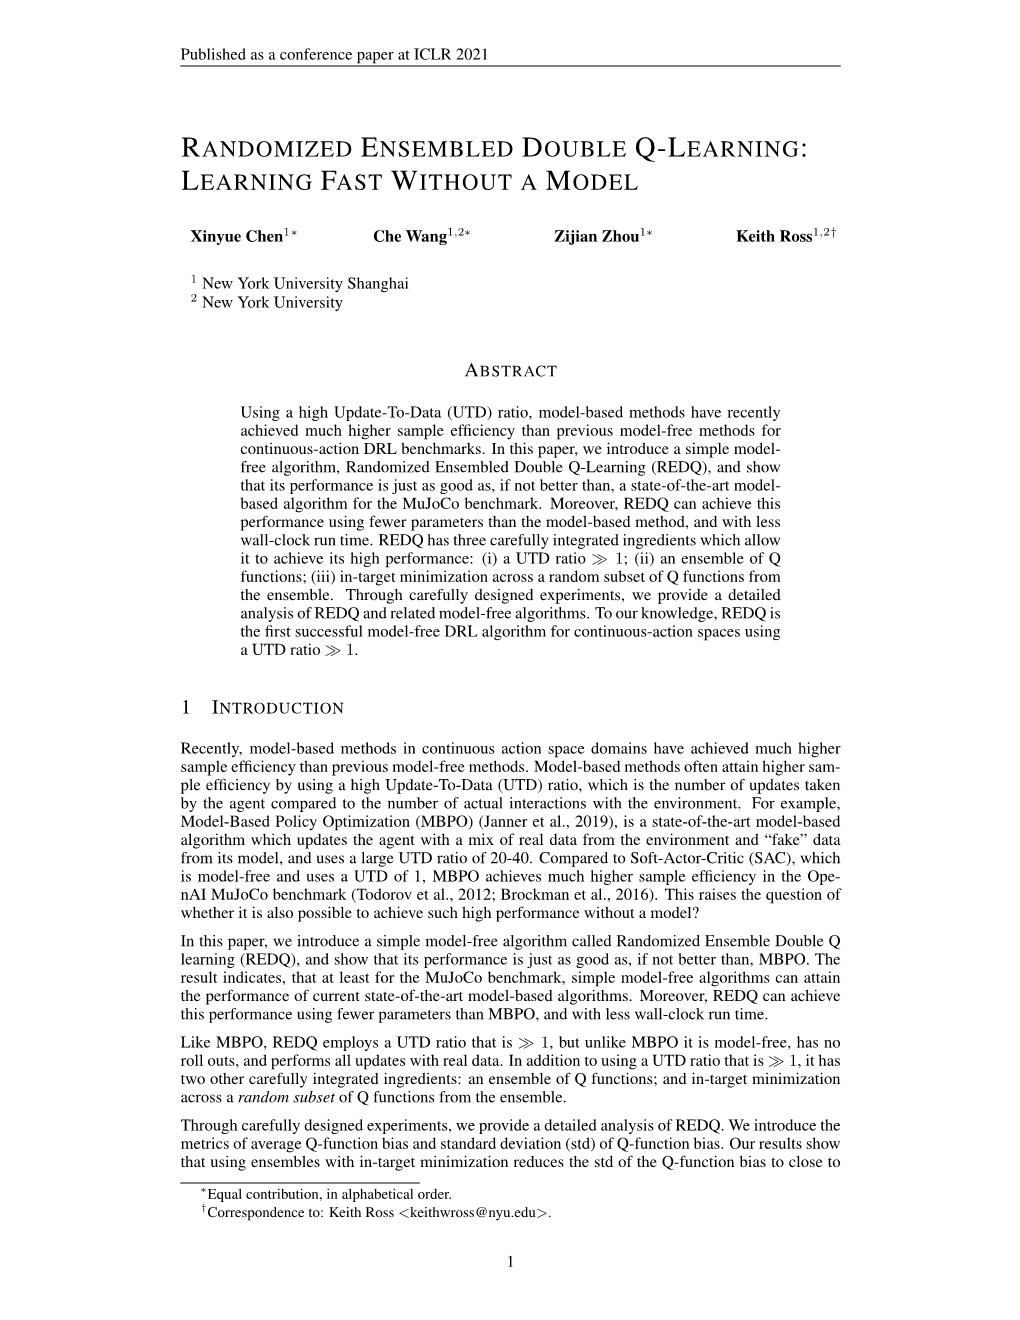 Randomized Ensembled Double Q-Learning: Learning Fast Withouta Model